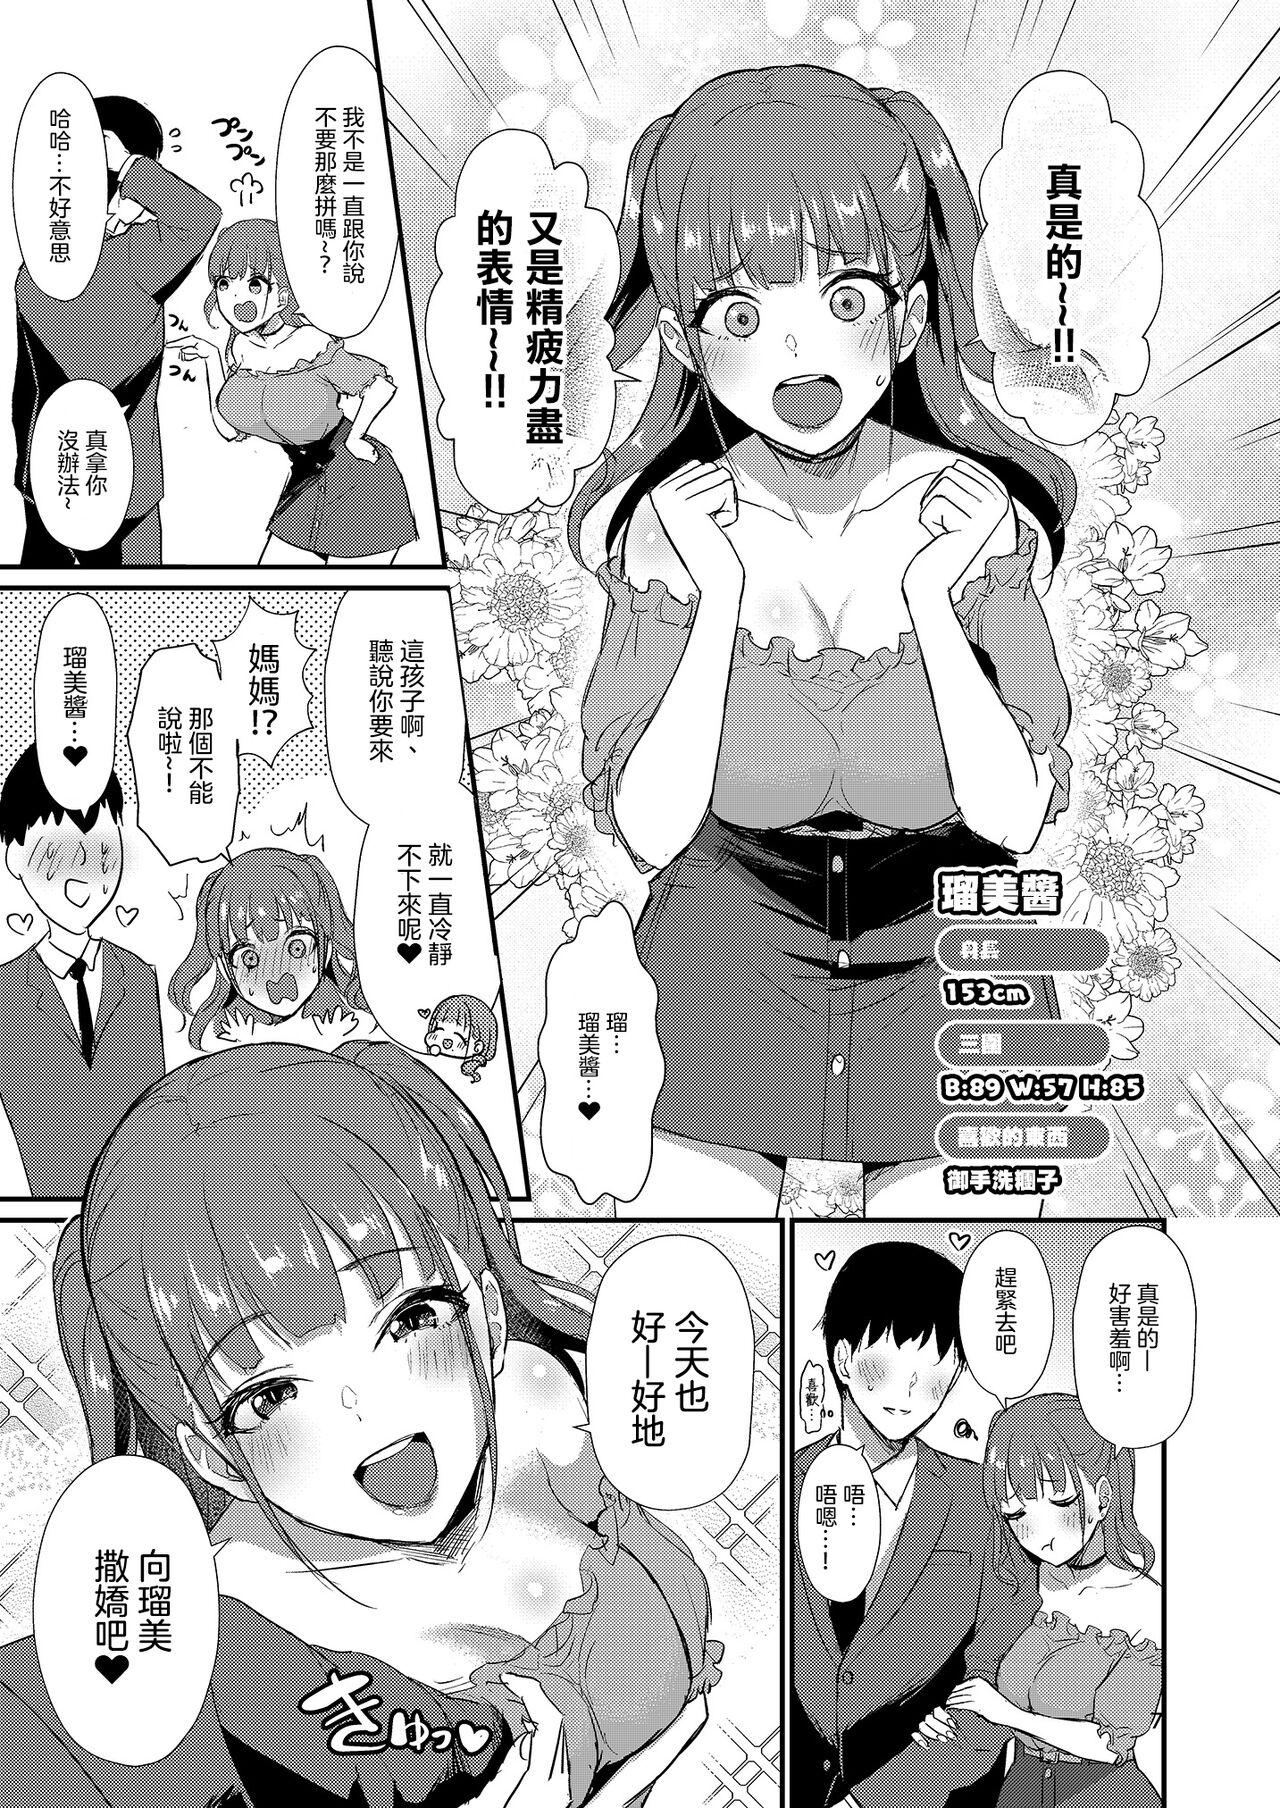 Behind Homehome Home e Youkoso! - Welcome to Home Home Home! | 歡迎來到誇誇屋！ Free Fucking - Page 8